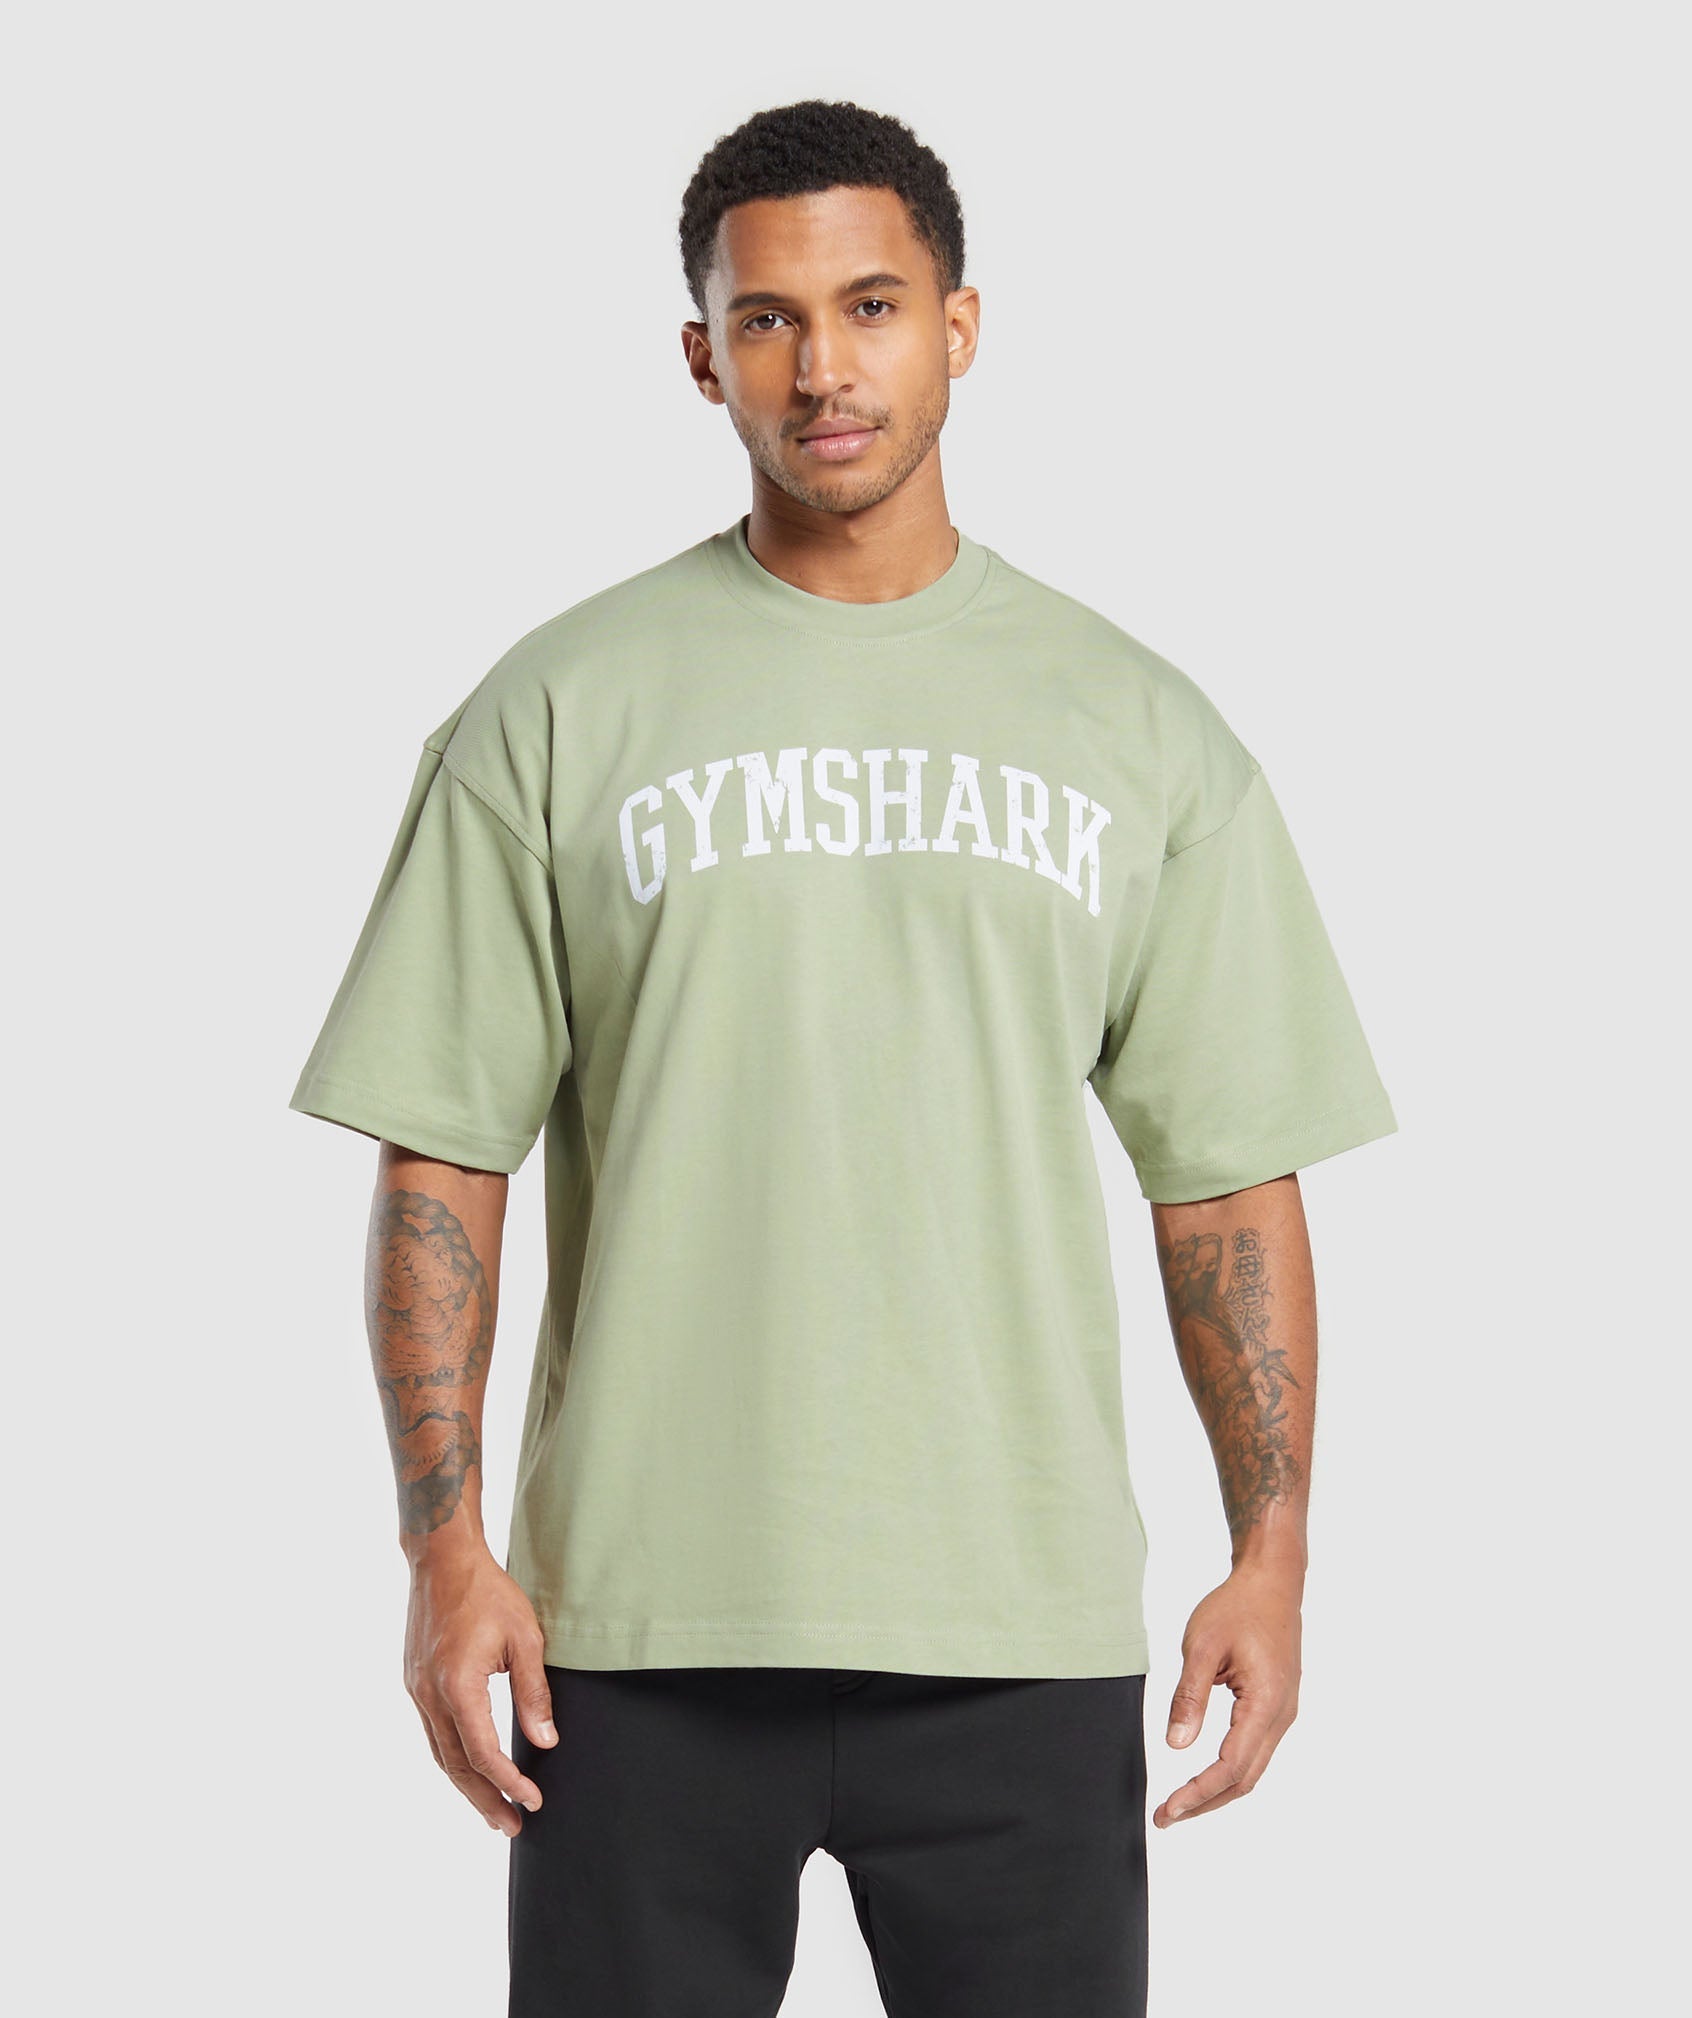 Collegiate T-Shirt in Faded Green - view 1